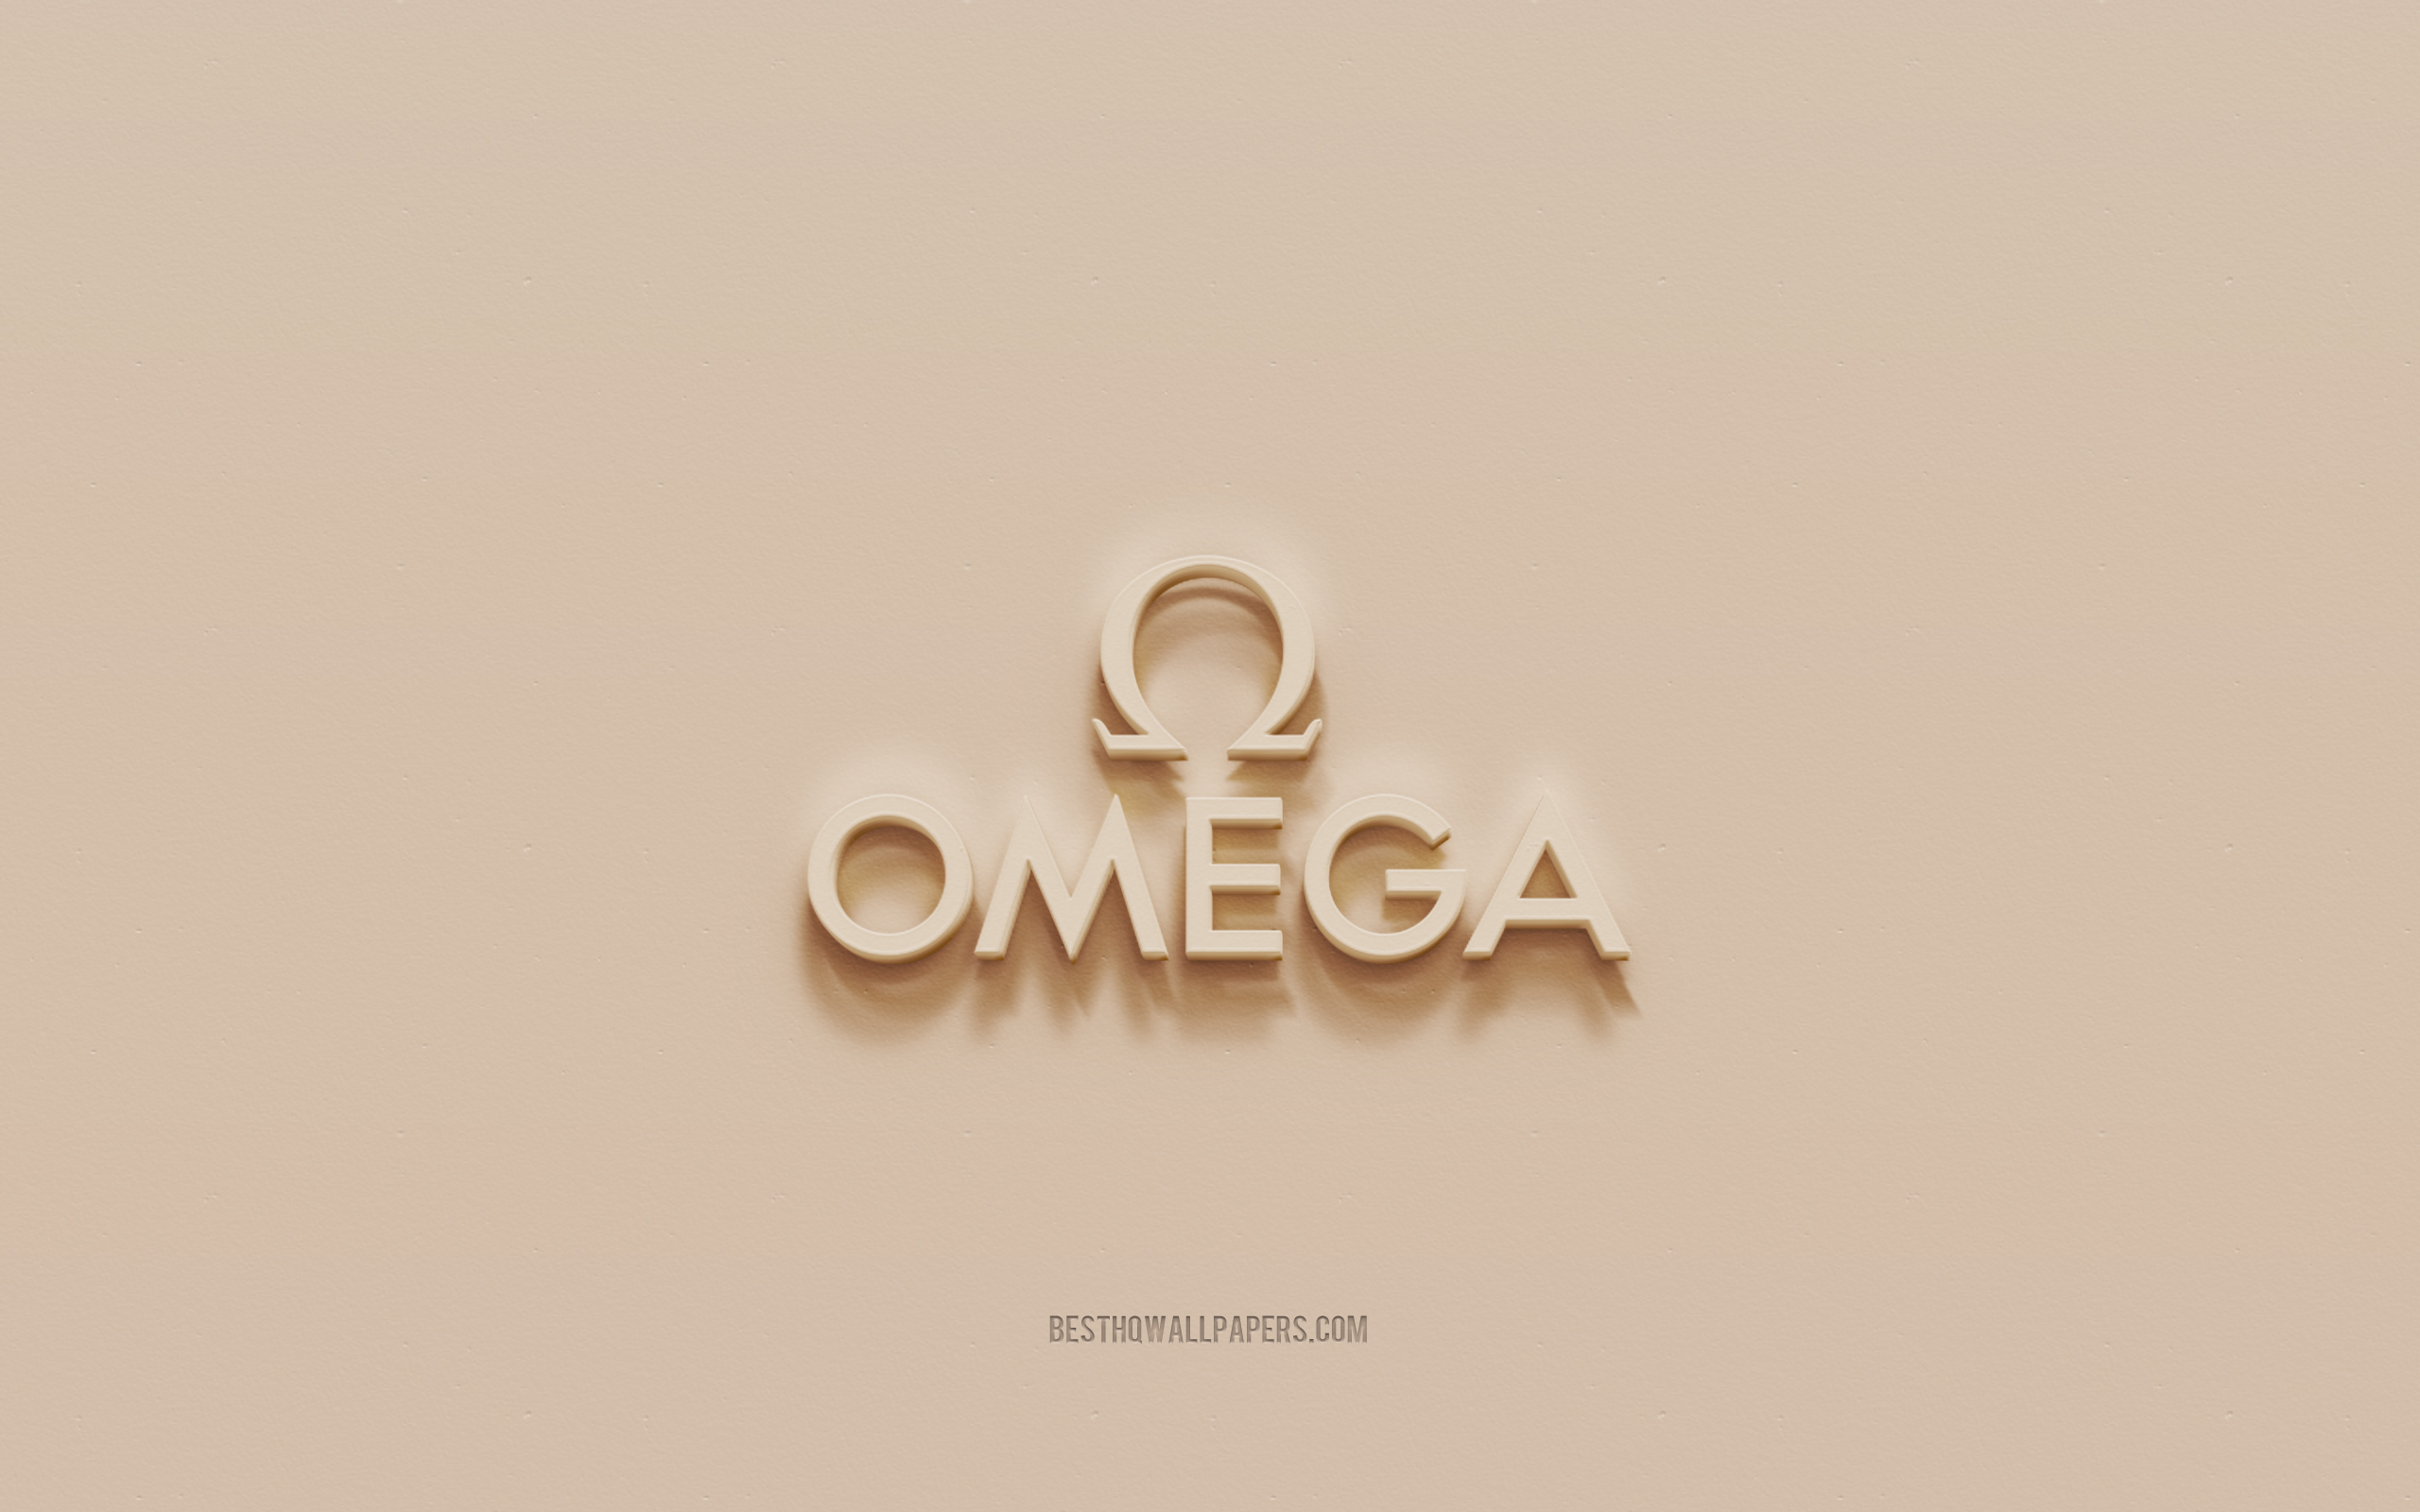 Omega Watch Wallpapers  Wallpaper Cave